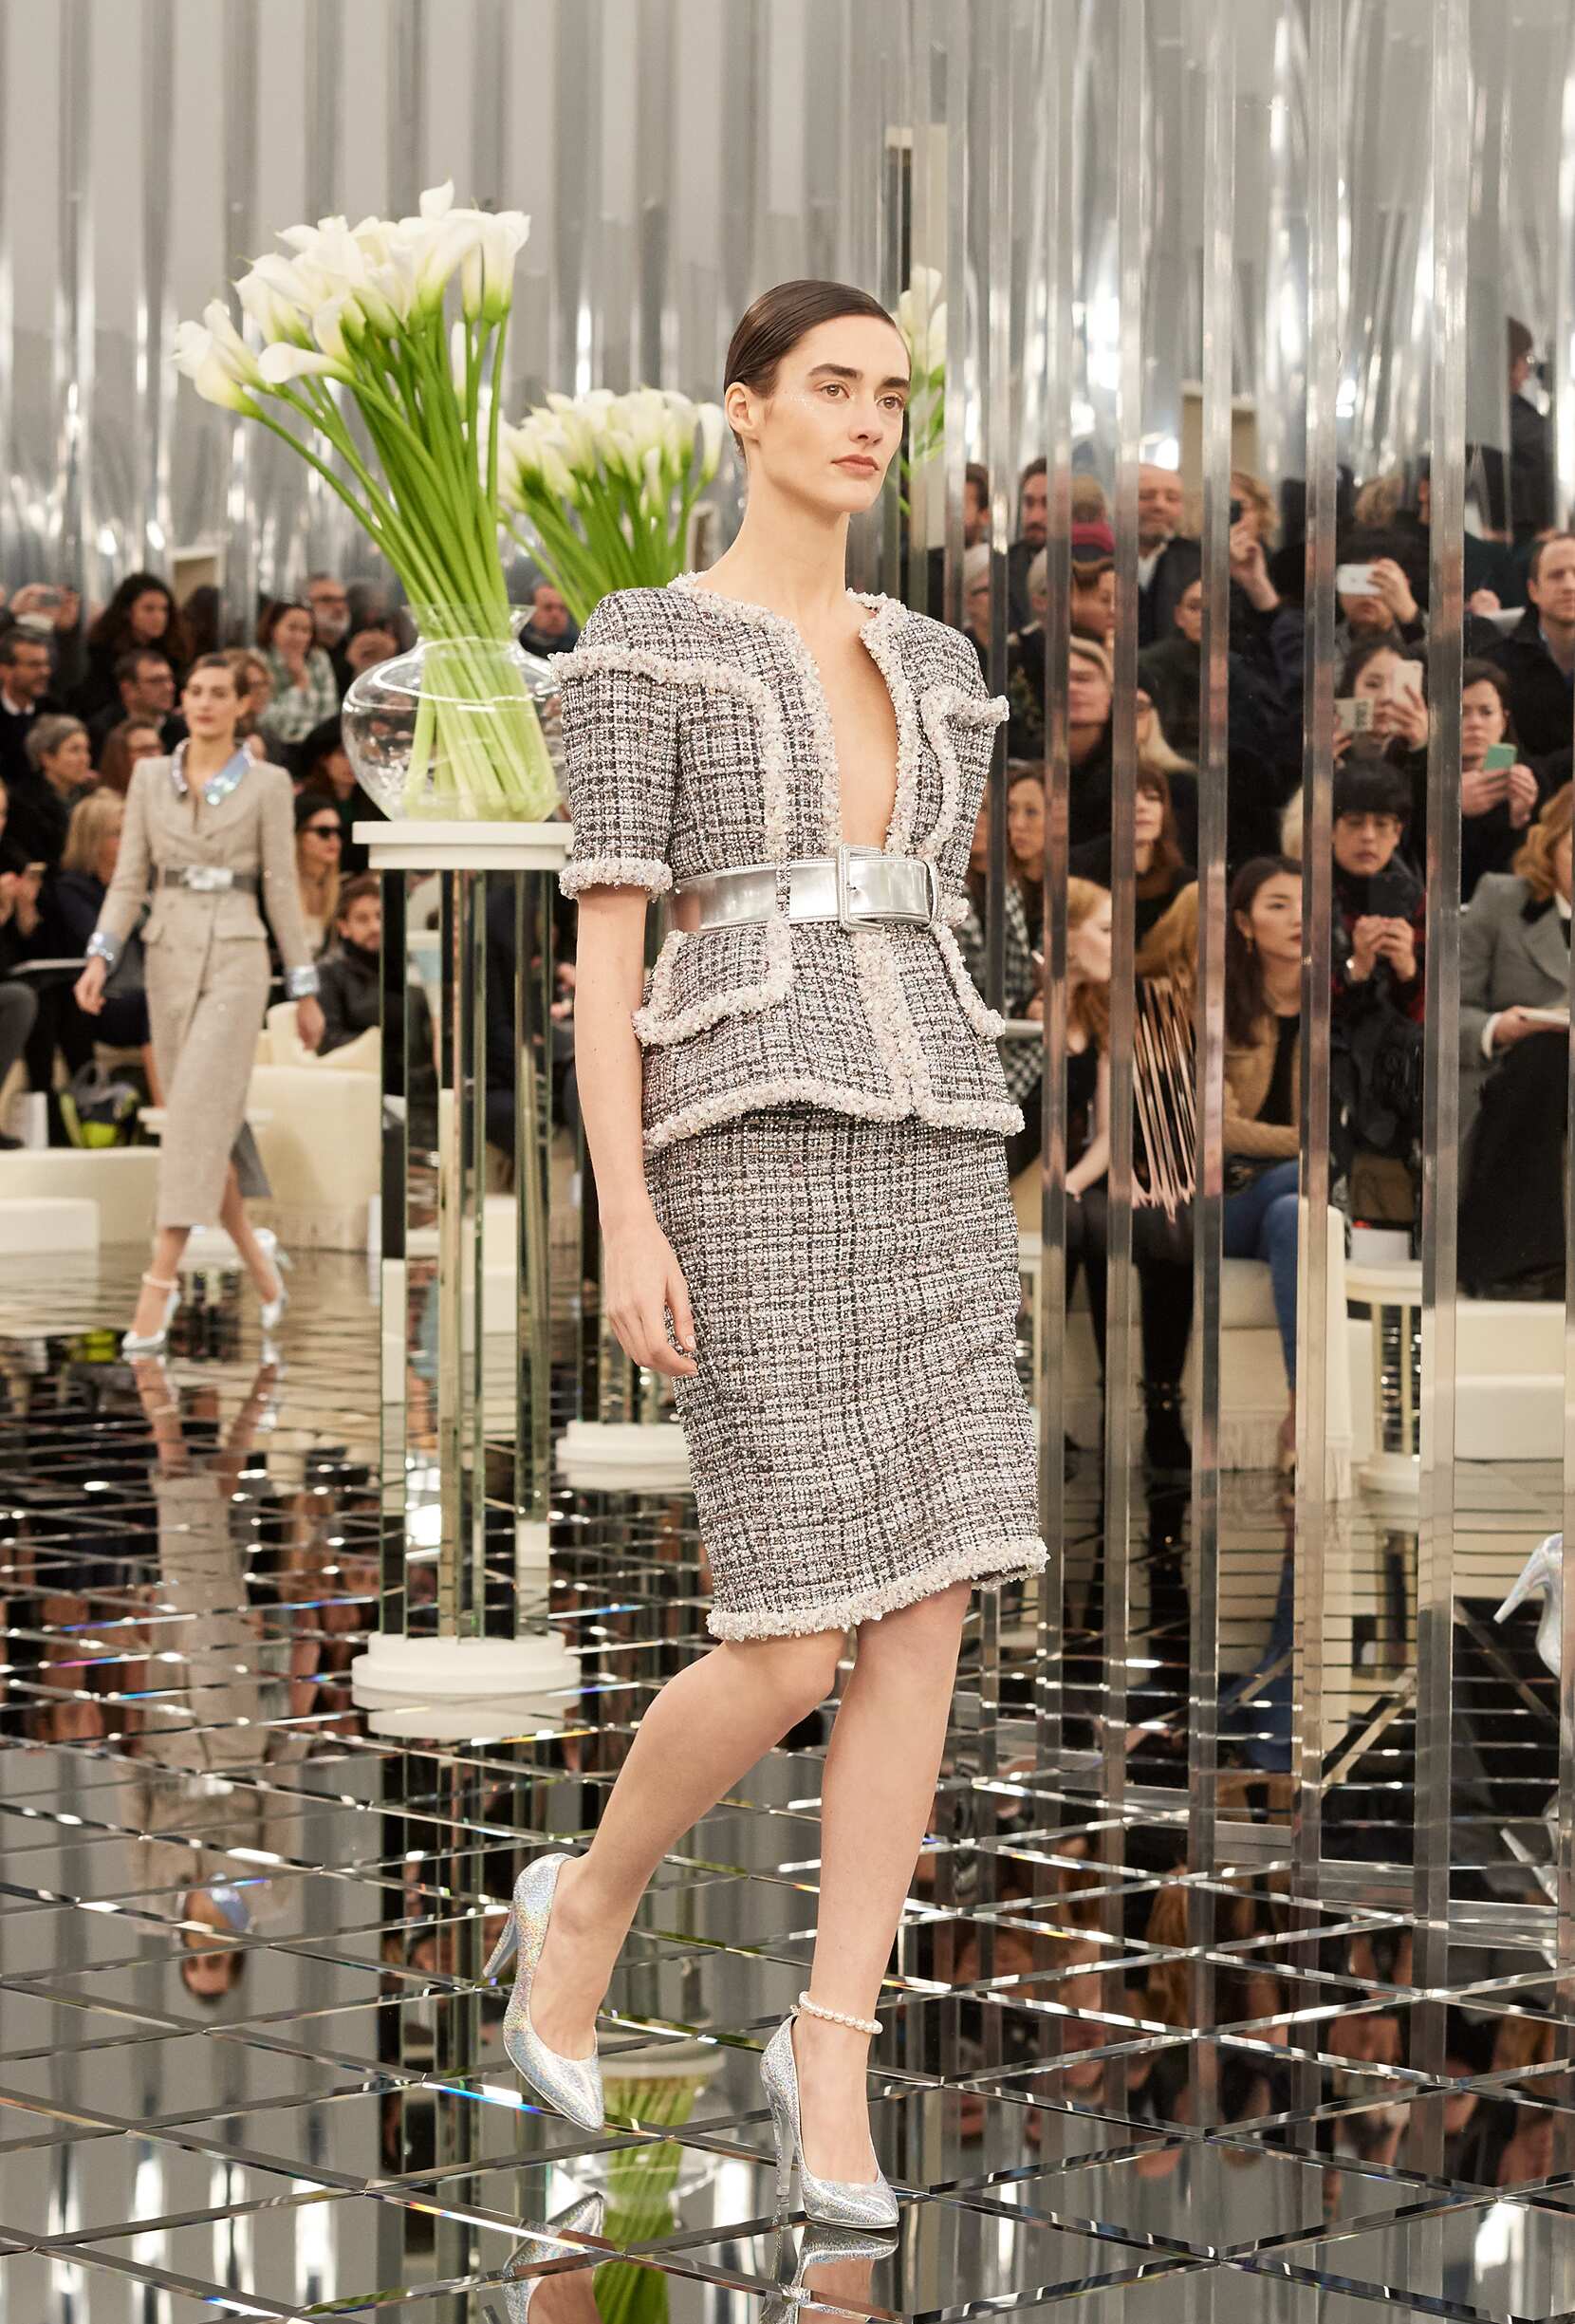 CHANEL SPRING SUMMER 2017 HAUTE COUTURE COLLECTION | The ...